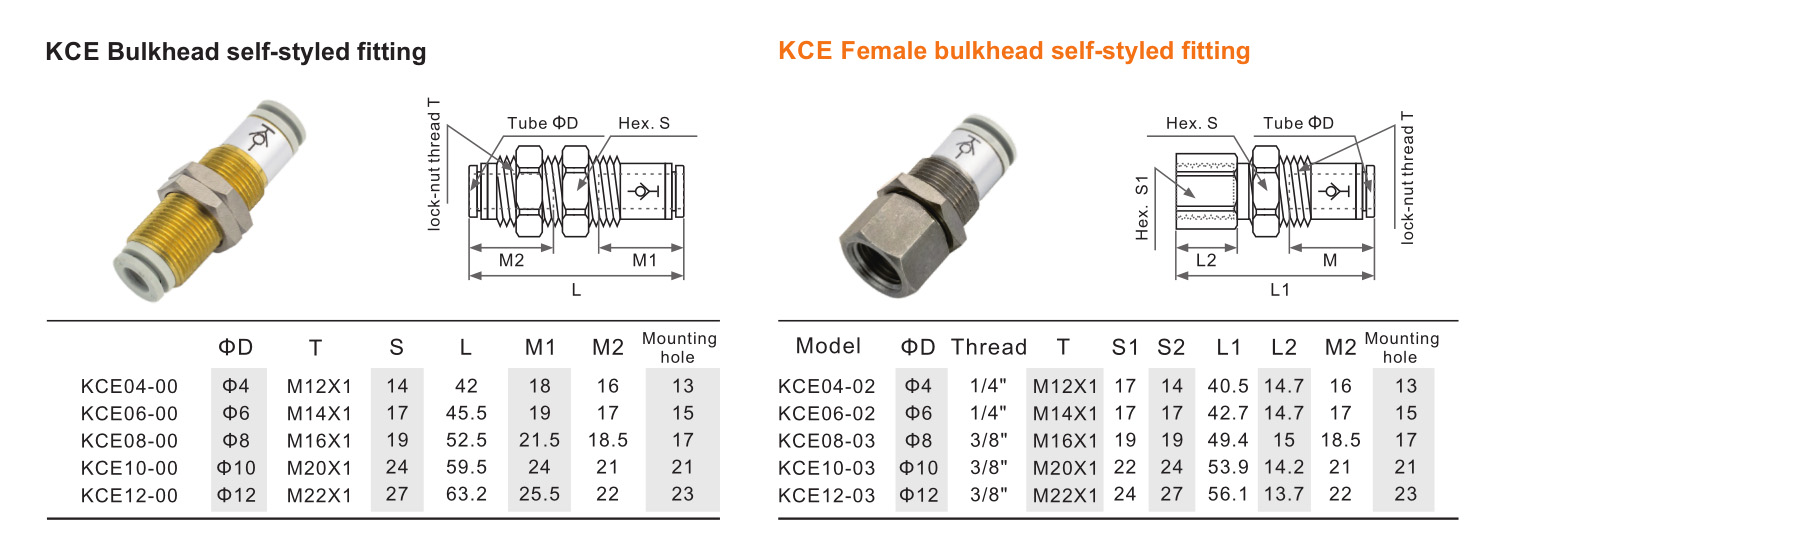 KC series self-styled fitting